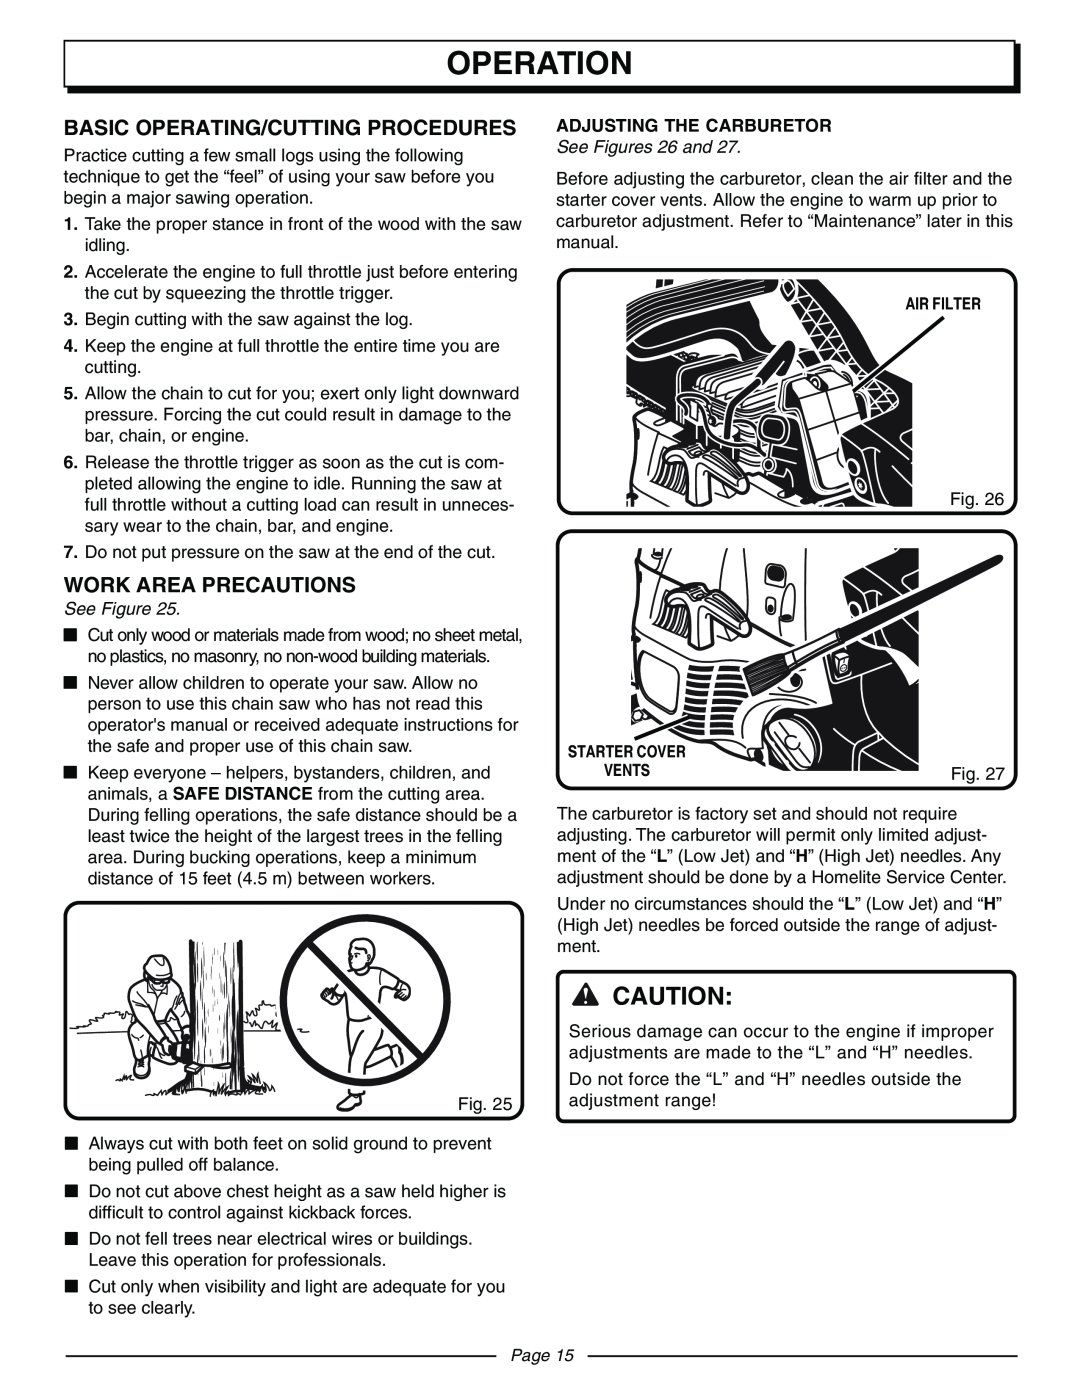 Homelite UT10942D manual Basic Operating/Cutting Procedures, Work Area Precautions, Operation, See Figures 26 and, Page 